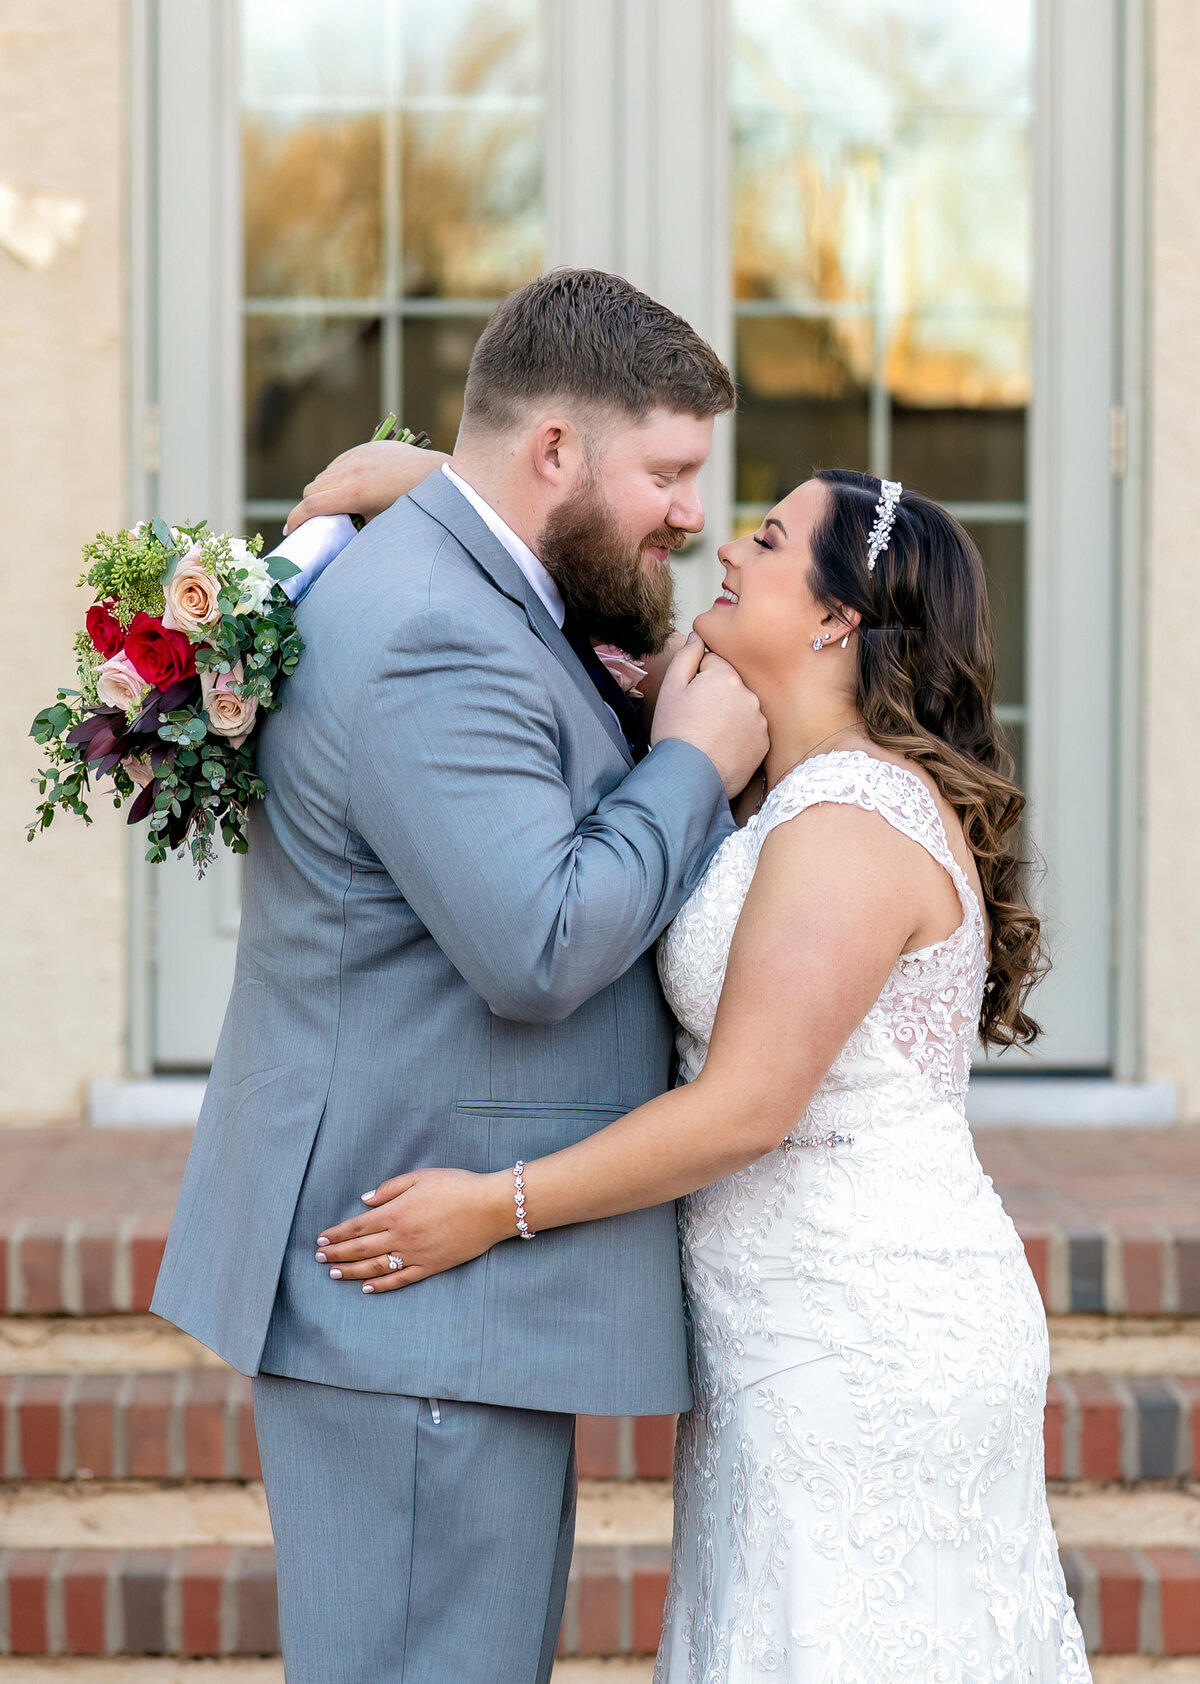 Groom is wearing a gray suit and bride is wearing a lace wedding dress and holding her bouqet over the grooms should while the groom cups her chin to pull the bride in for a kiss at the TTU Merket Alumni Center in Lubbock TX